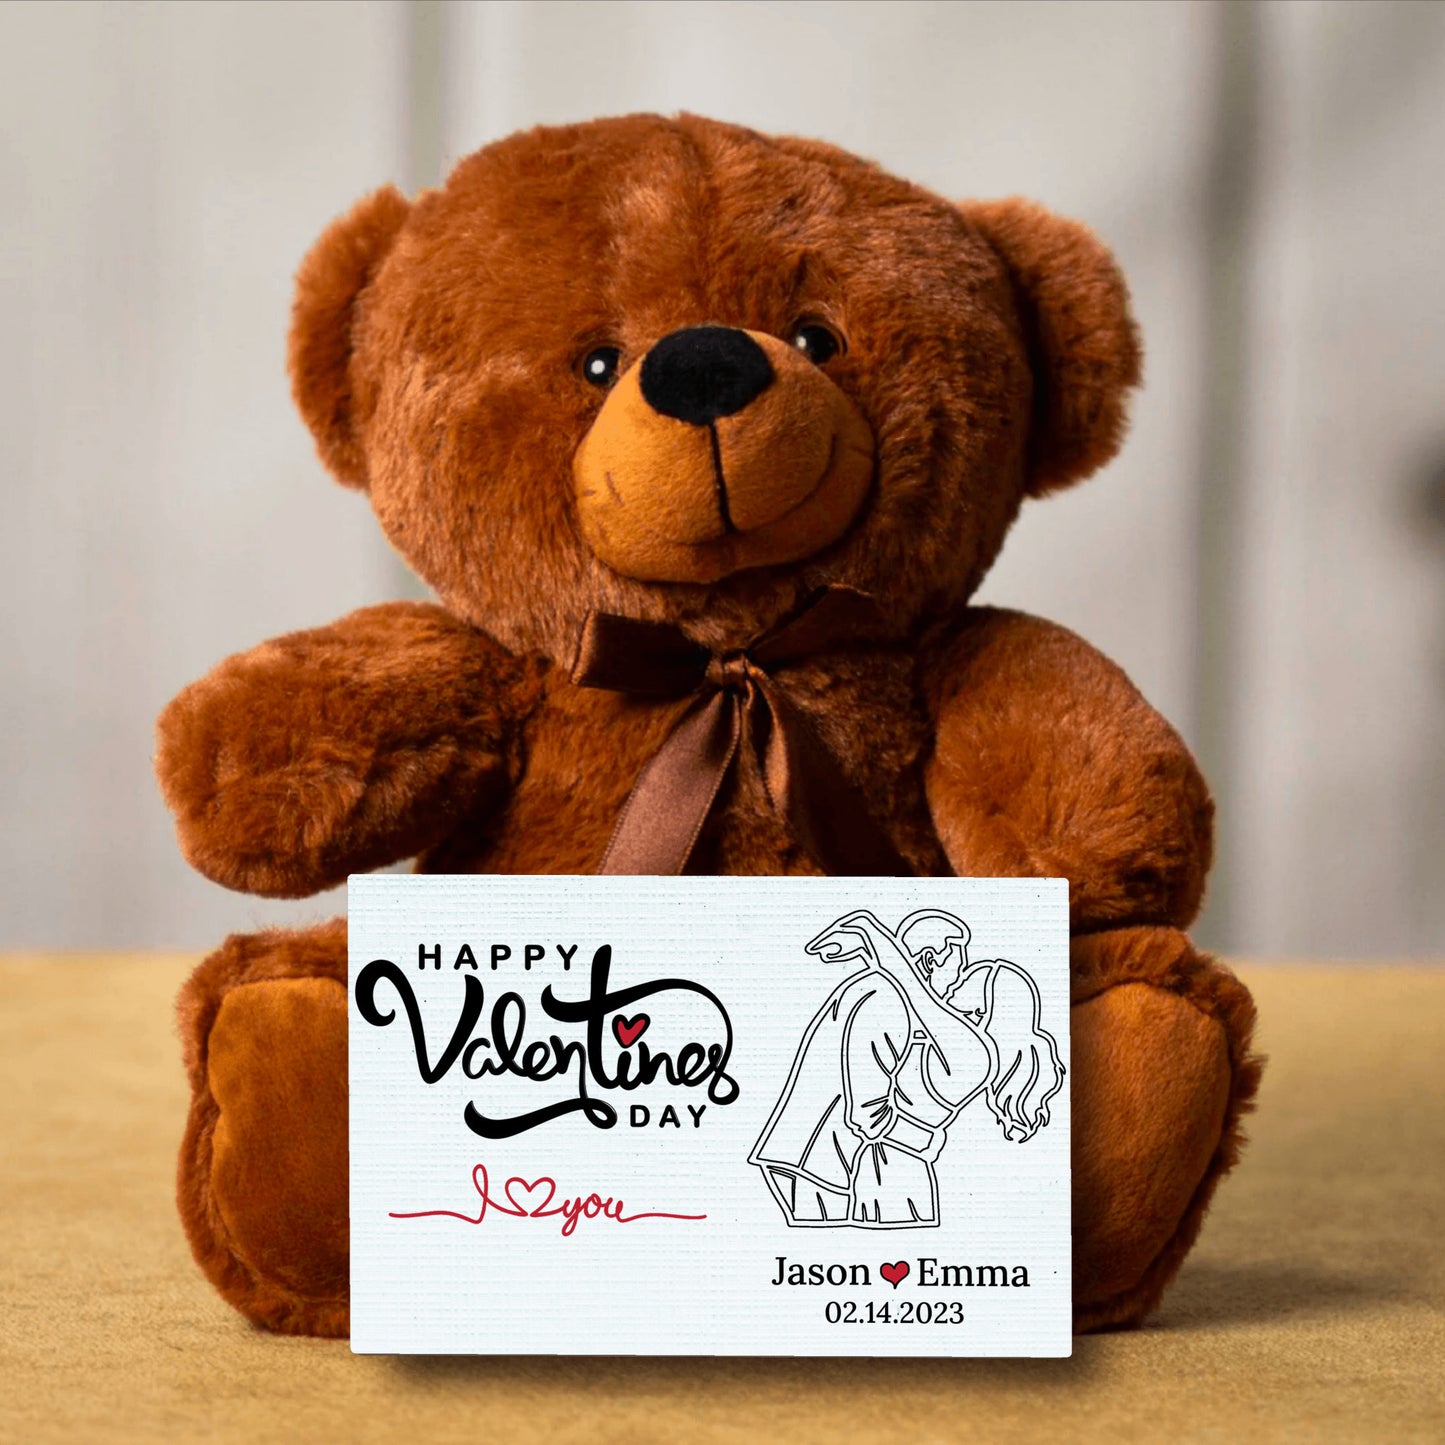 Personalized Teddy Bear - Custom Message Card With Happy Valentines Couple - Your Own Personal Photo - Perfect Valentine's Gift